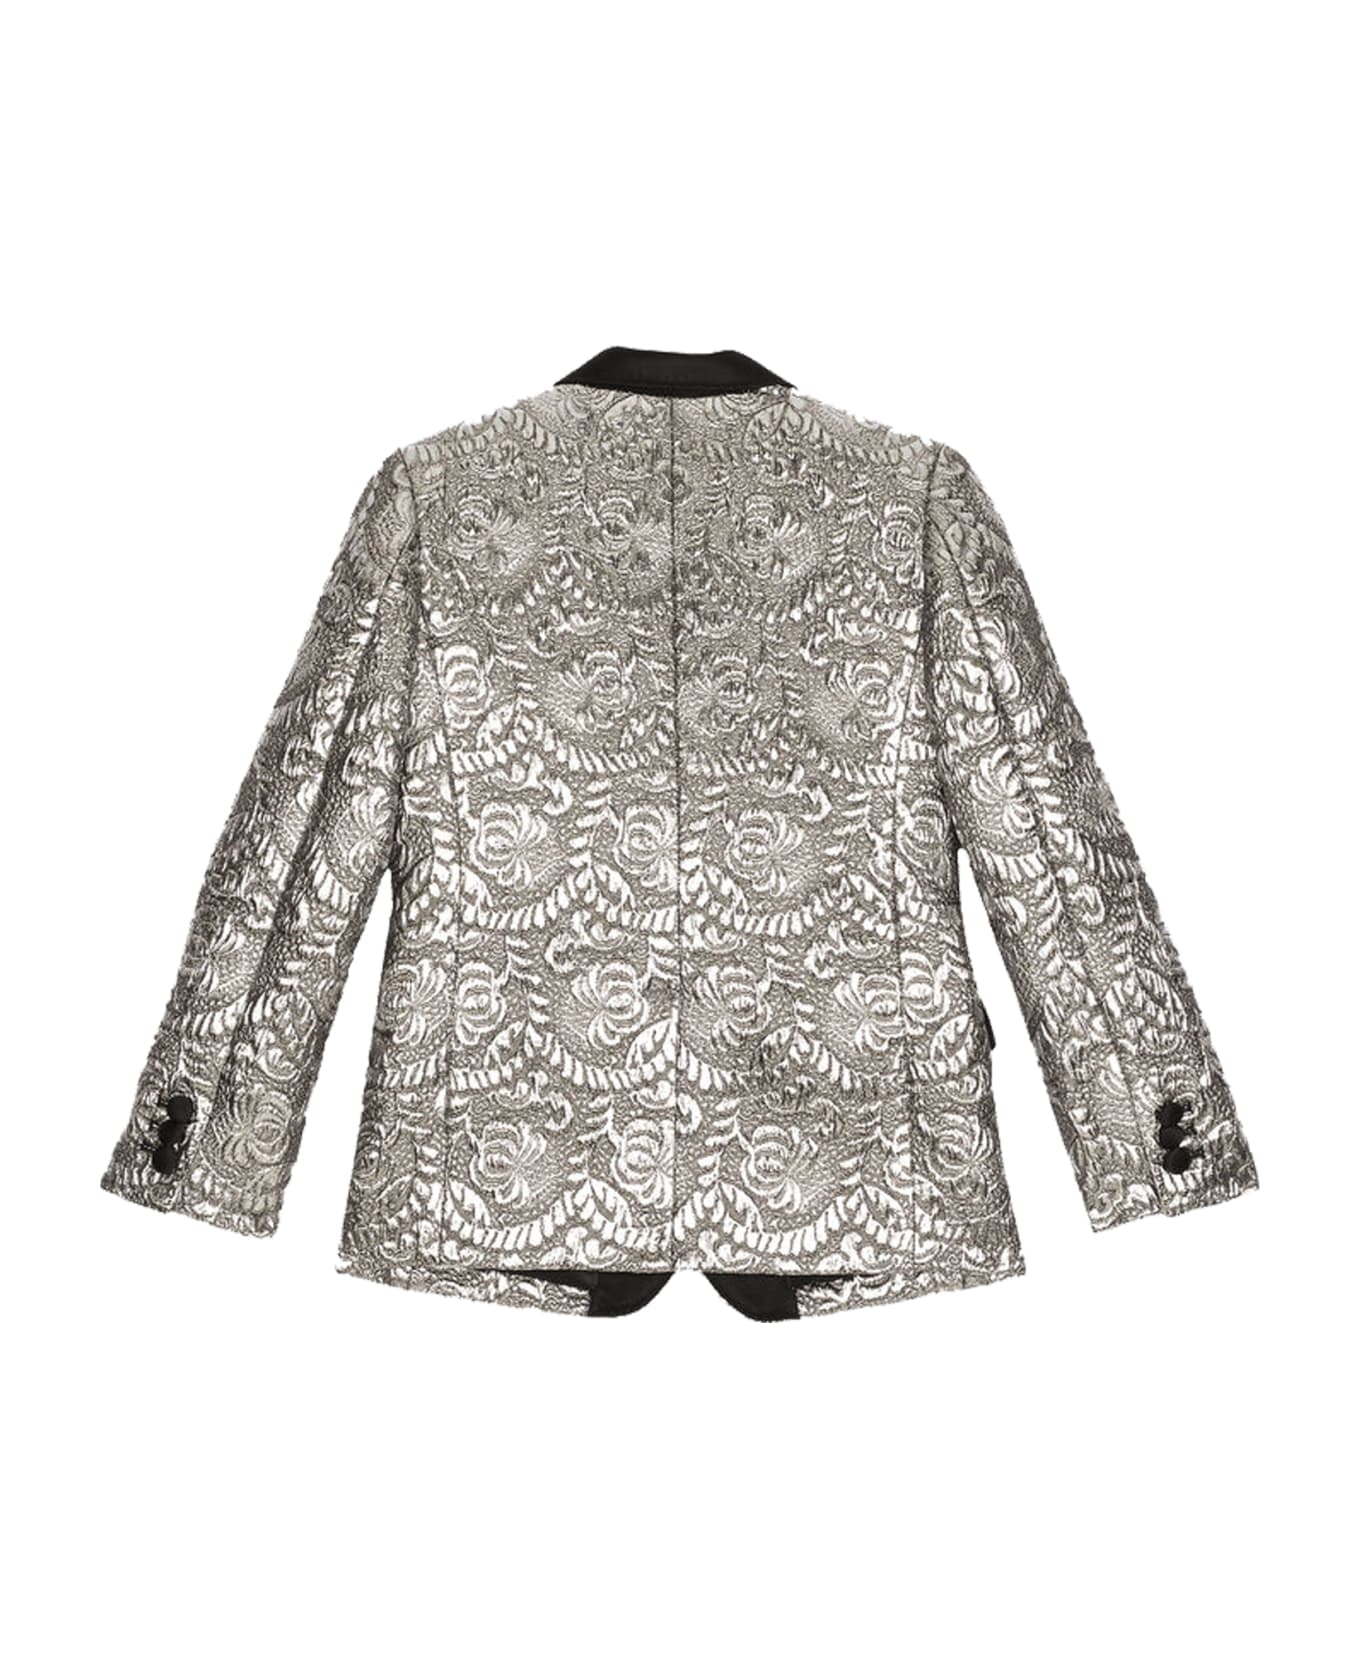 Dolce & Gabbana Single-breasted Jacket In Laminated Jacquard - Silver